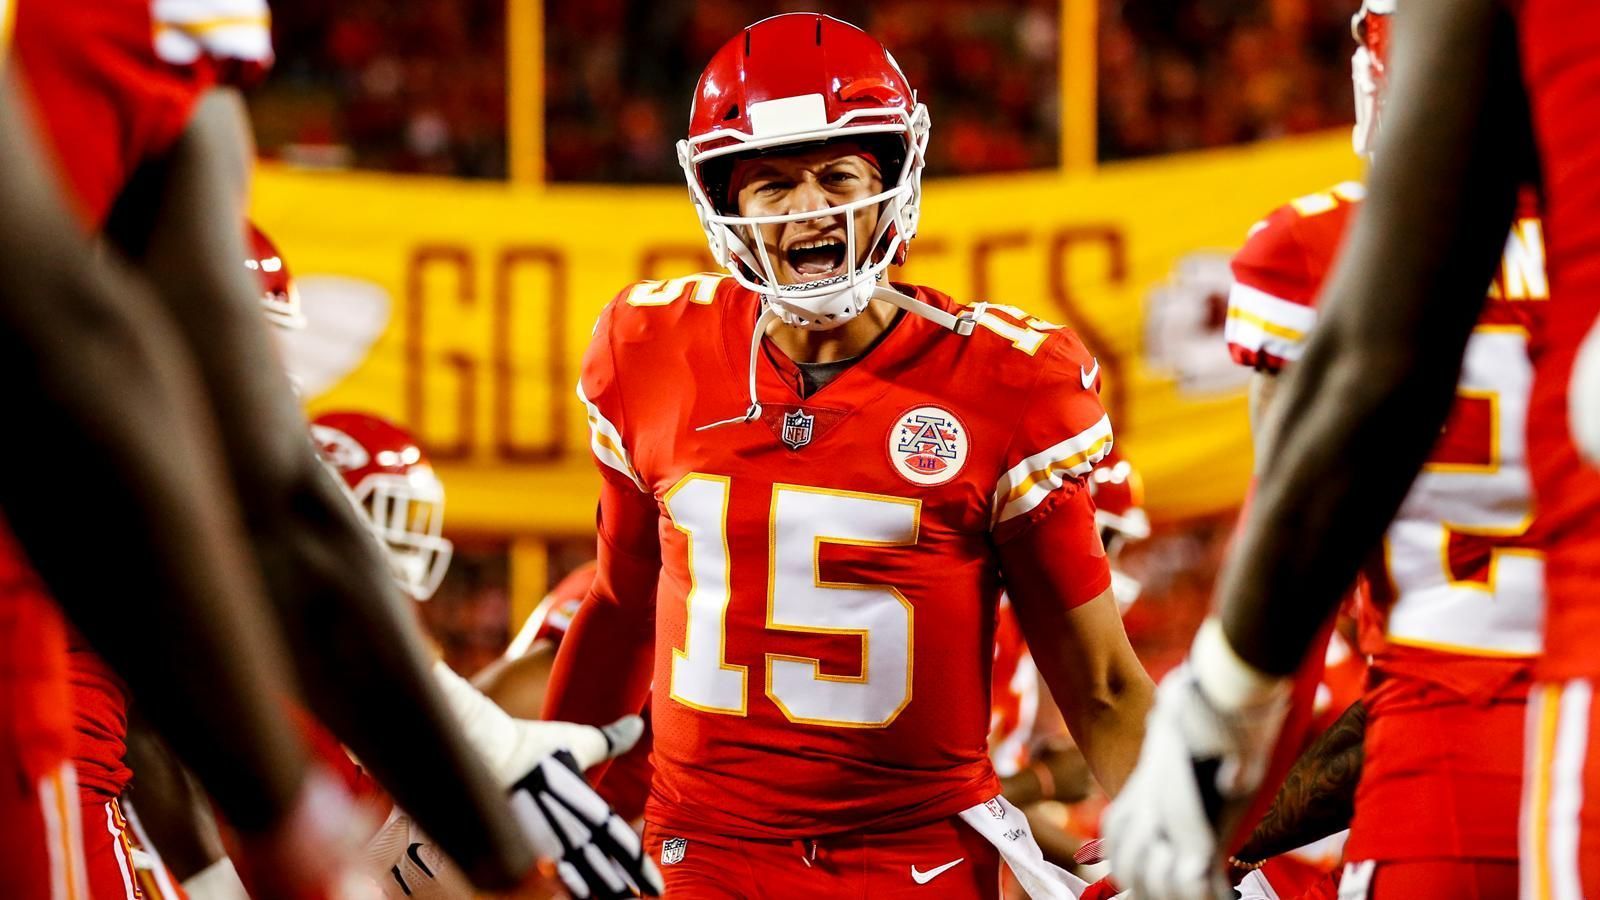 
                <strong>Woche 1</strong><br>
                AFC Offensive Player of the Week: Patrick Mahomes (Quarterback - Kansas City Chiefs) im BildAFC Defensive Player of the Week: T.J. Watt (Linebacker - Pittsburgh Steelers)AFC Special Team Player of the Week: Jakeem Grant (Return Specialist - Miami Dolphins)NFC Offensive Player of the Week: Ryan Fitzpatrick (Quarterback - Tampa Bay Buccaneers)NFC Defensive Player of the Week: Harrison Smith (Safety - Minnesota Vikings)NFC Special Team Player of the Week: Greg Zuerlein (Kicker - Los Angeles Rams)Rookie of the Week: Denzel Ward (Cornerback - Cleveland Browns)
              